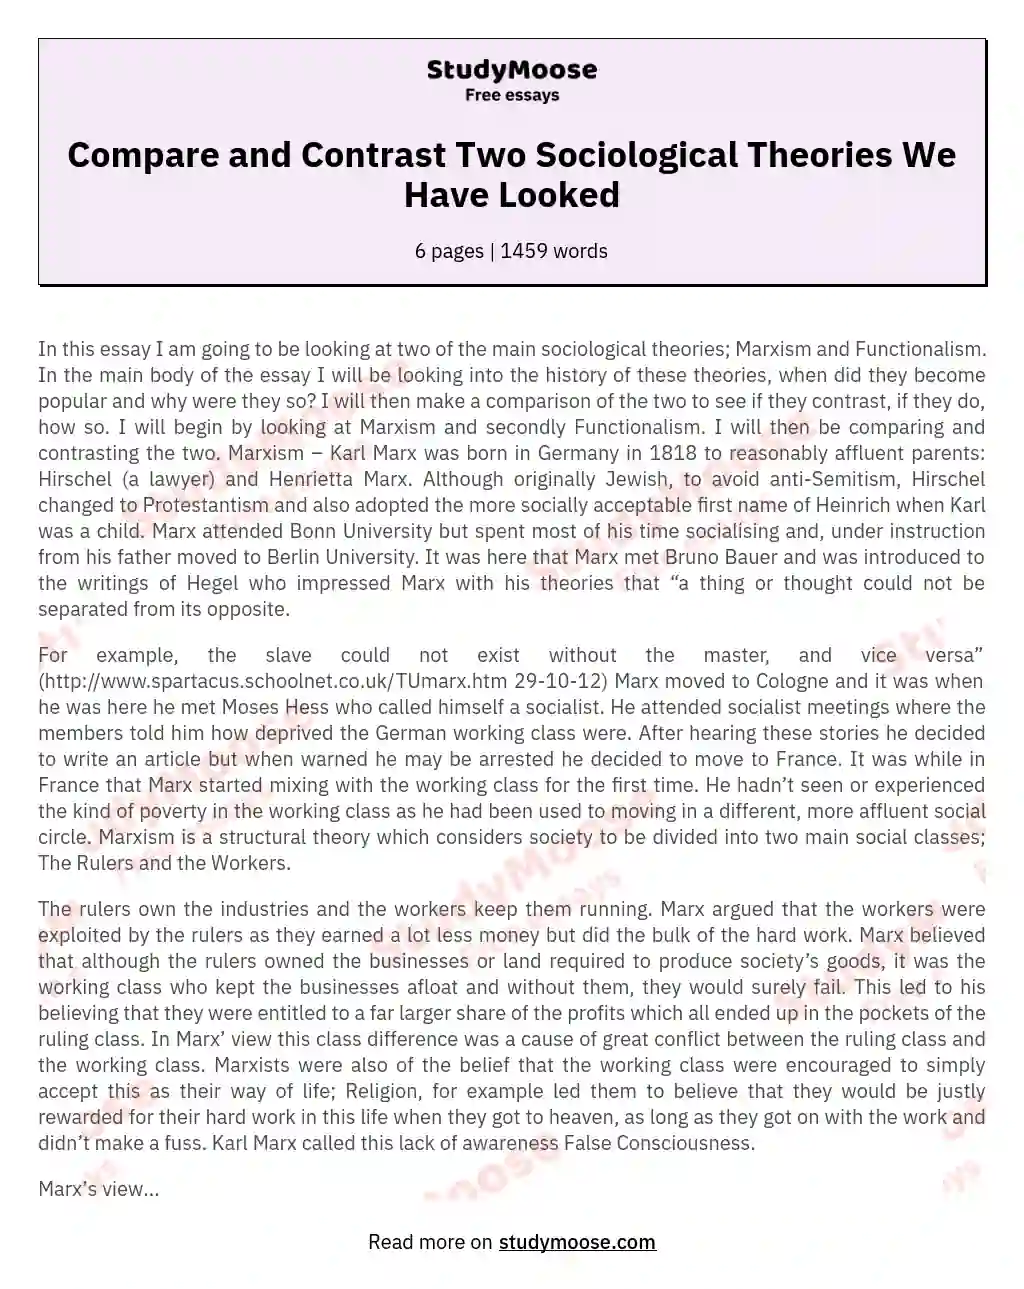 Compare and Contrast Two Sociological Theories We Have Looked